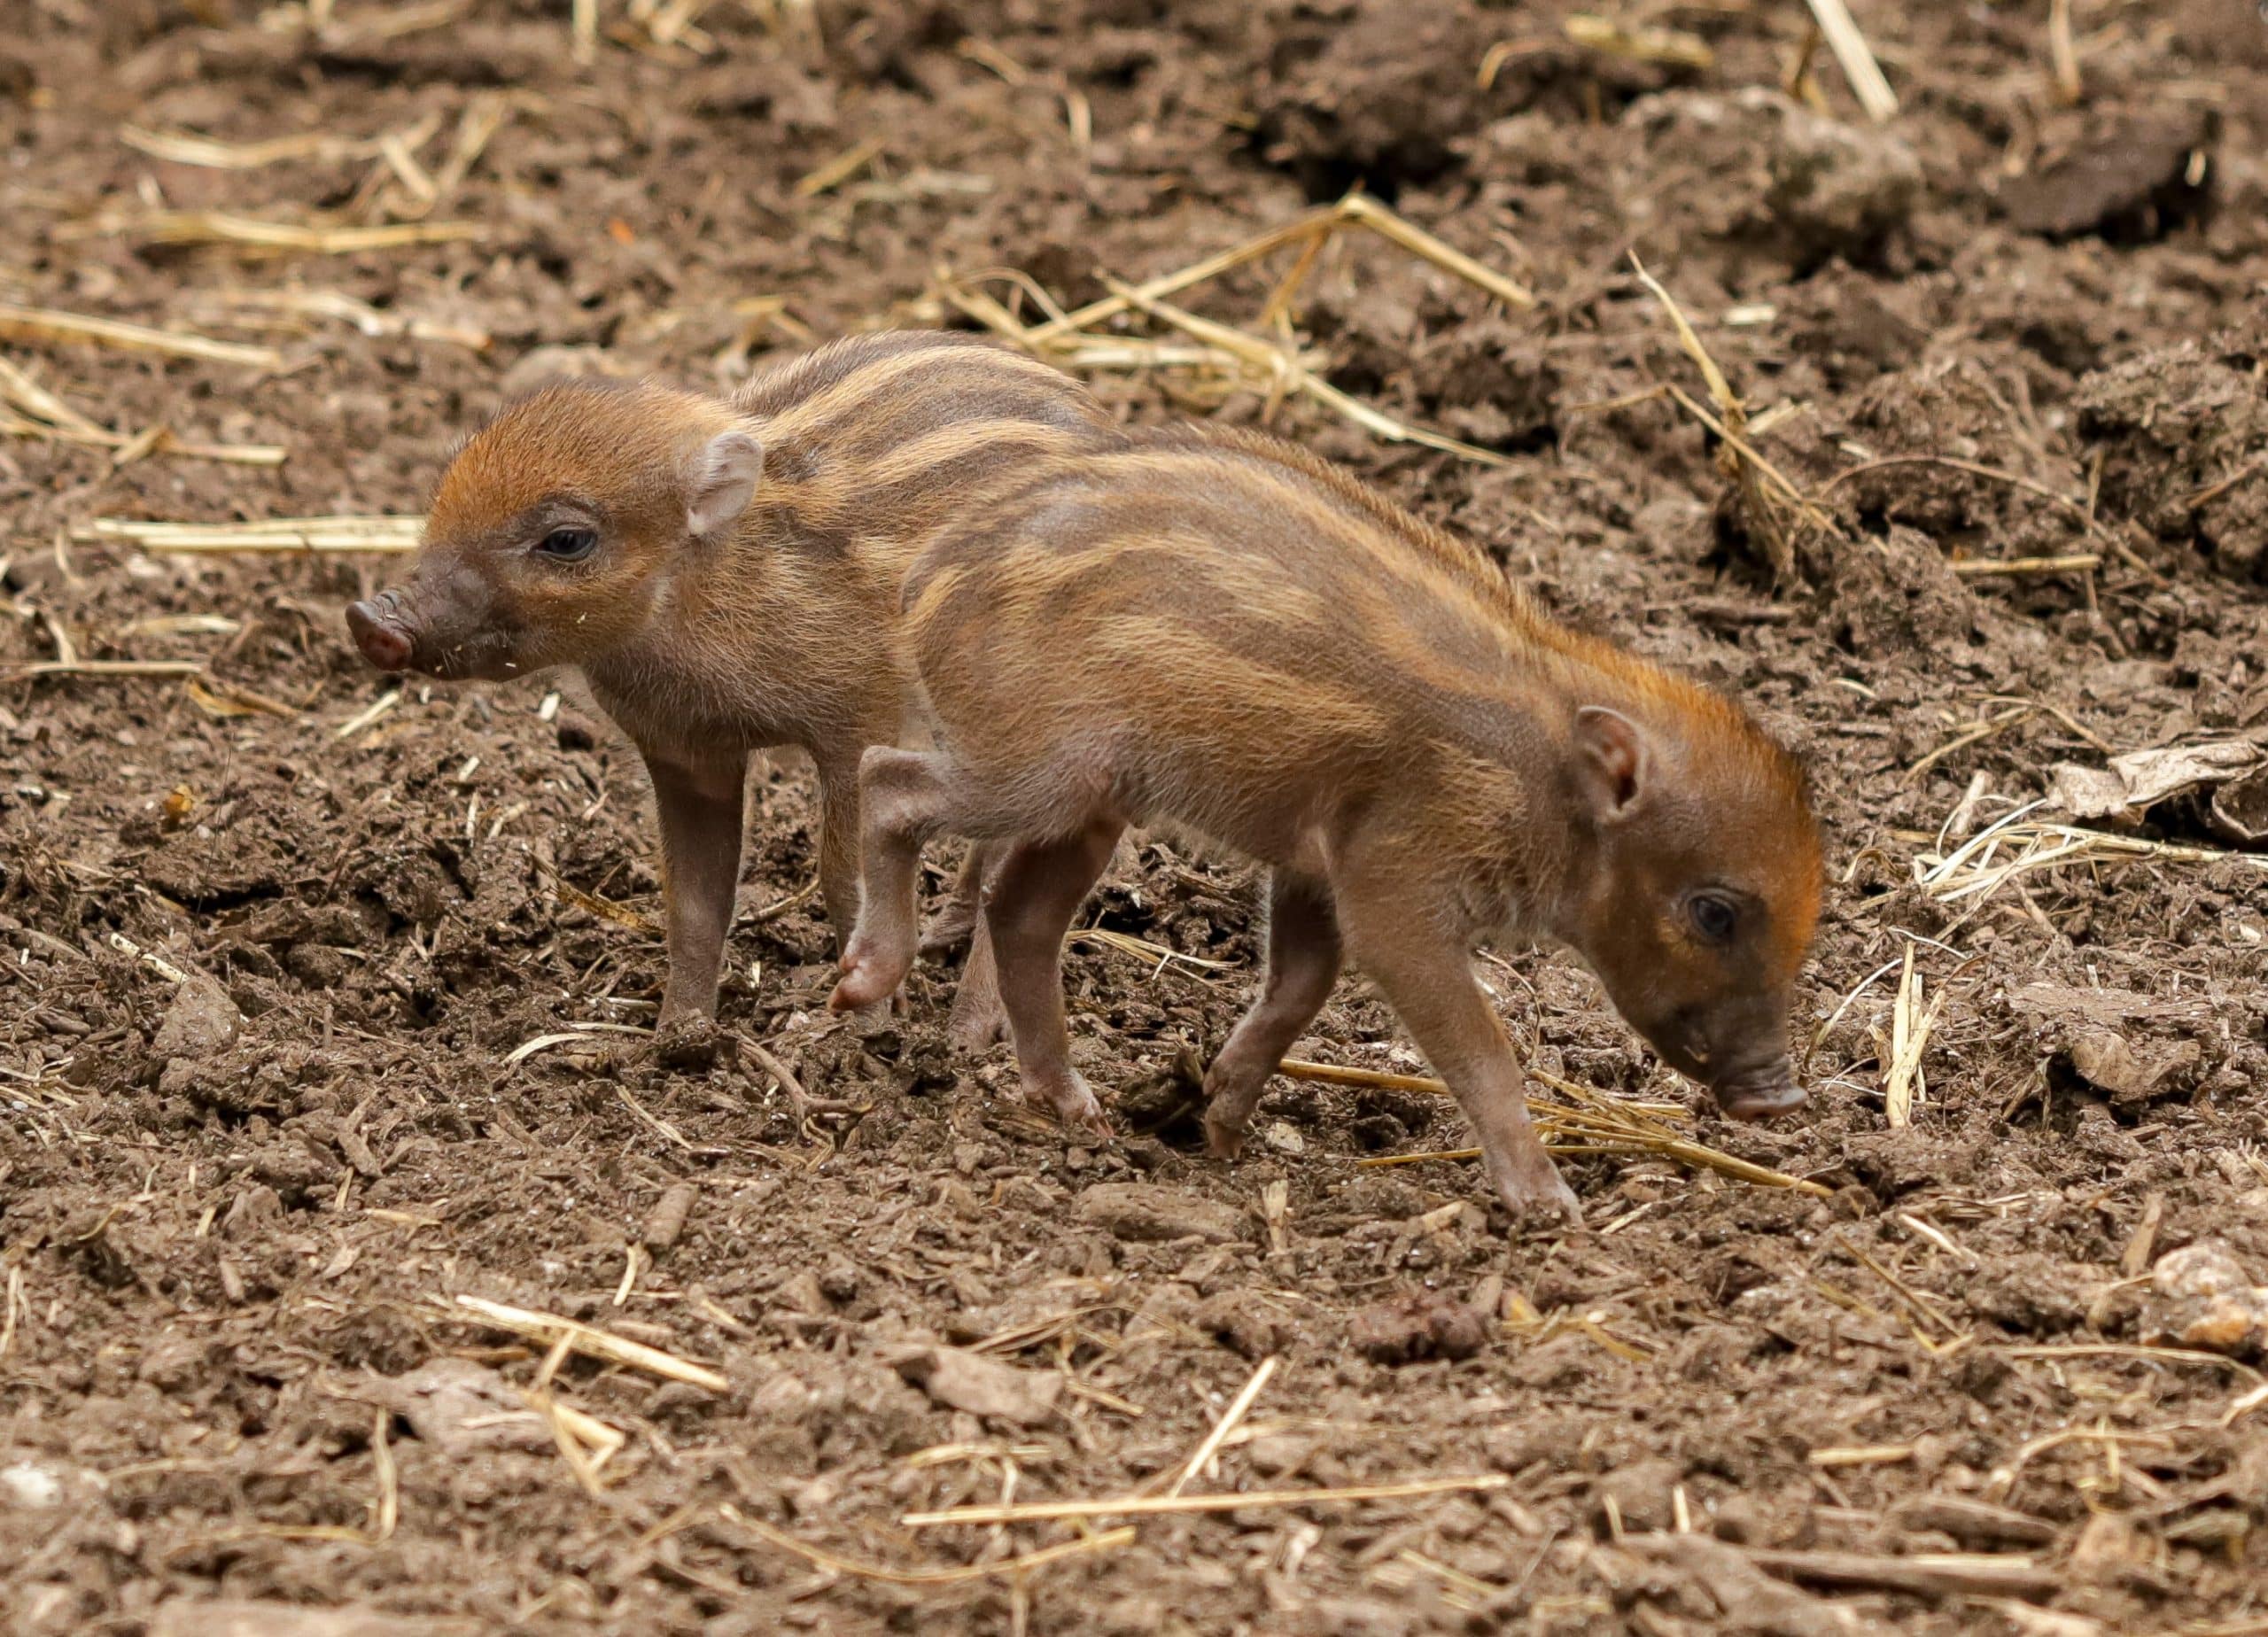 Visayan warty piglets: top 5 surprising facts that will melt your heart!